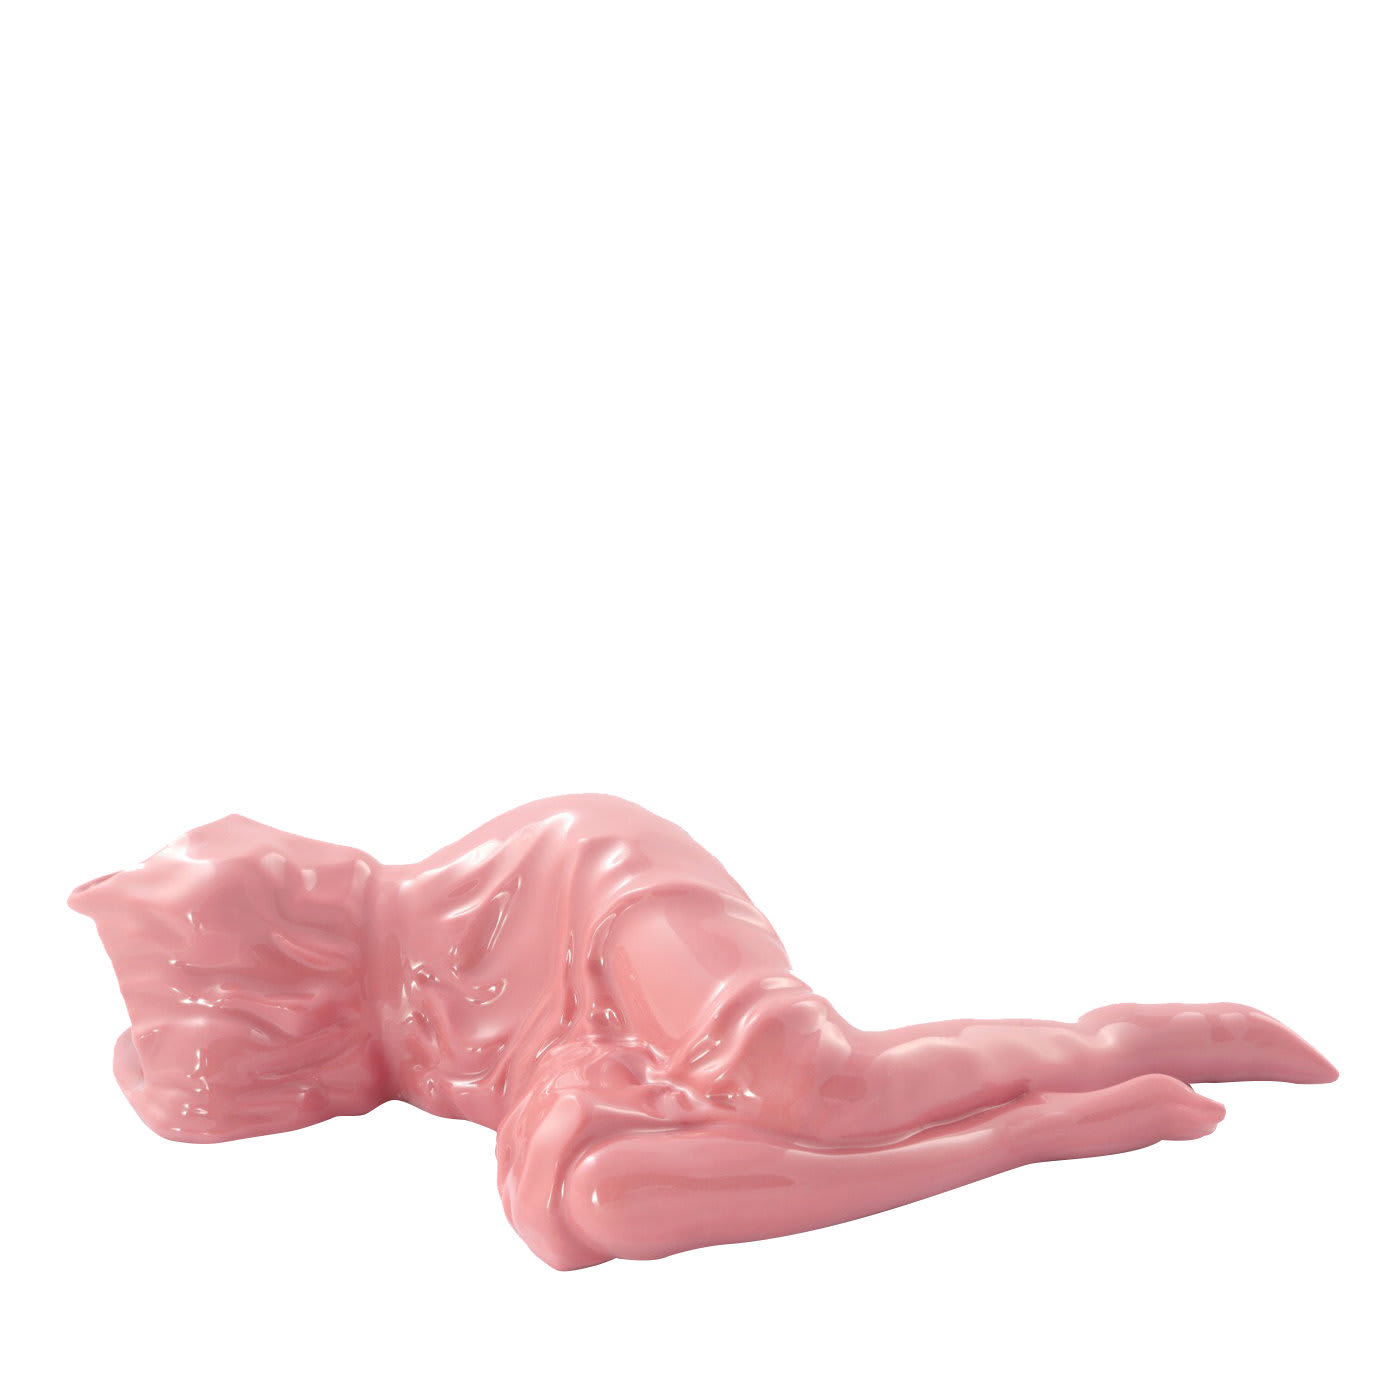 Lady Day Pink Sculpture by Liu Jianhua - Bottega Made in Cloister